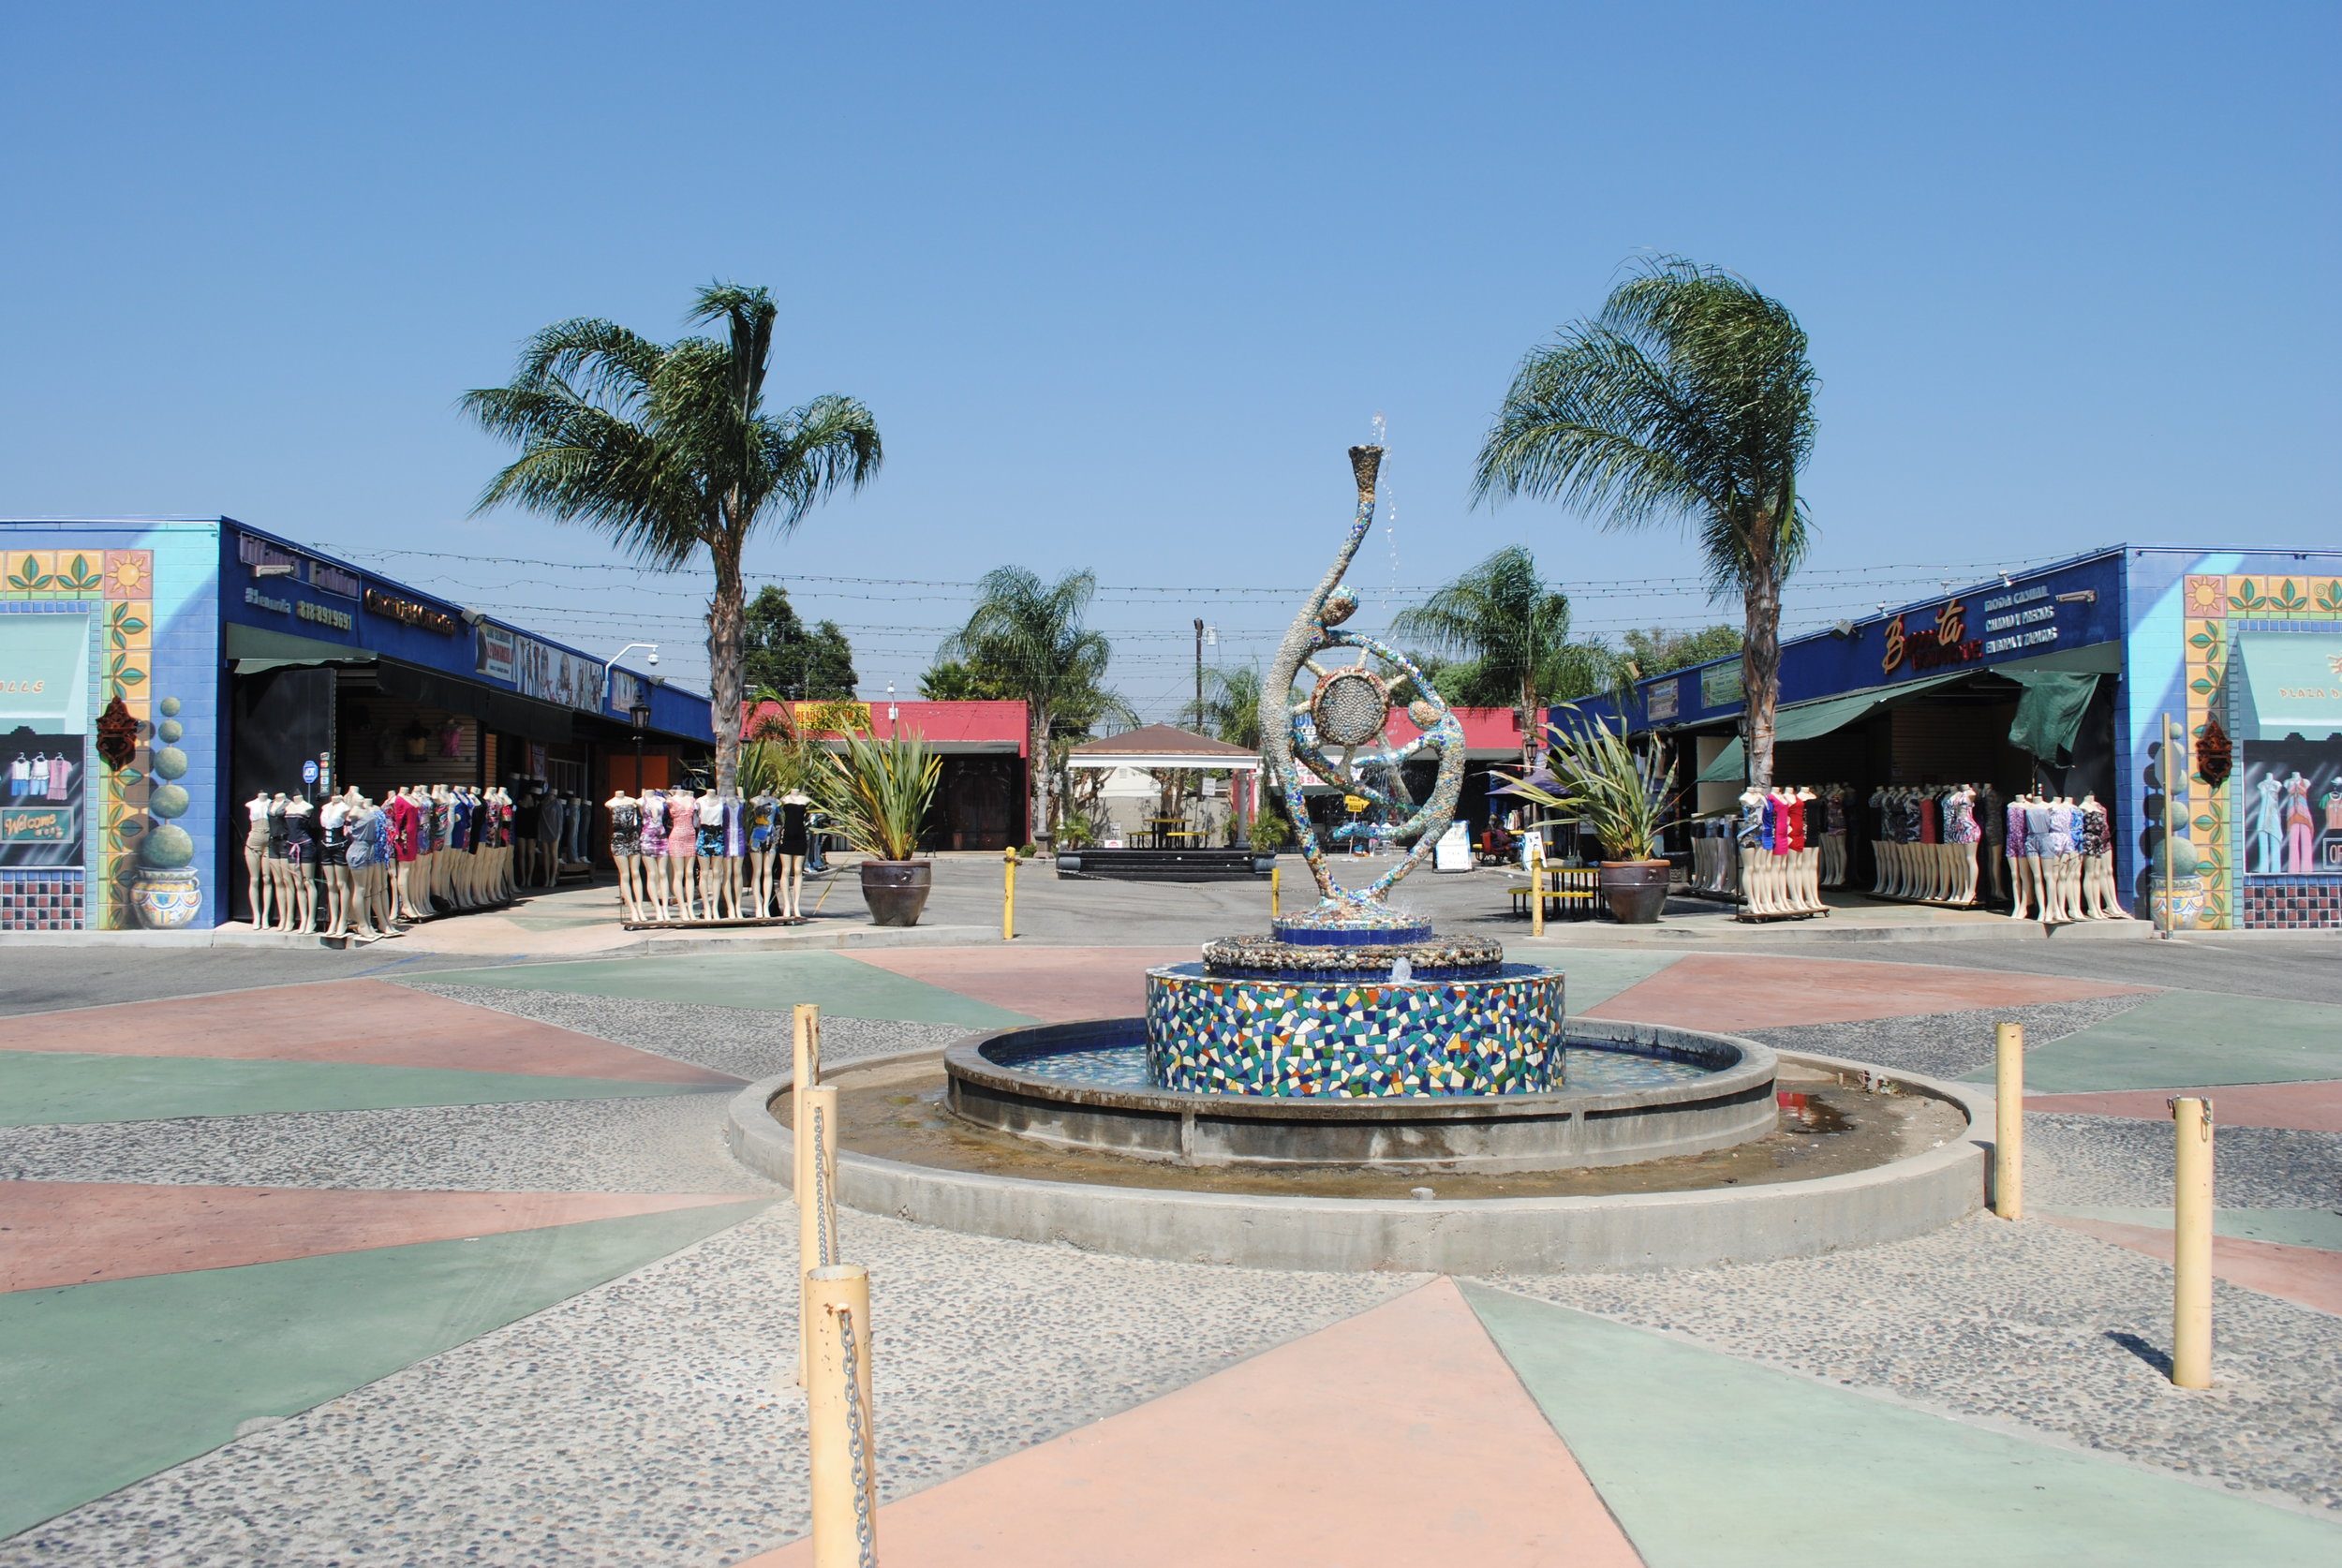 Courtyard view of Plaza Del Valle Shopping Center